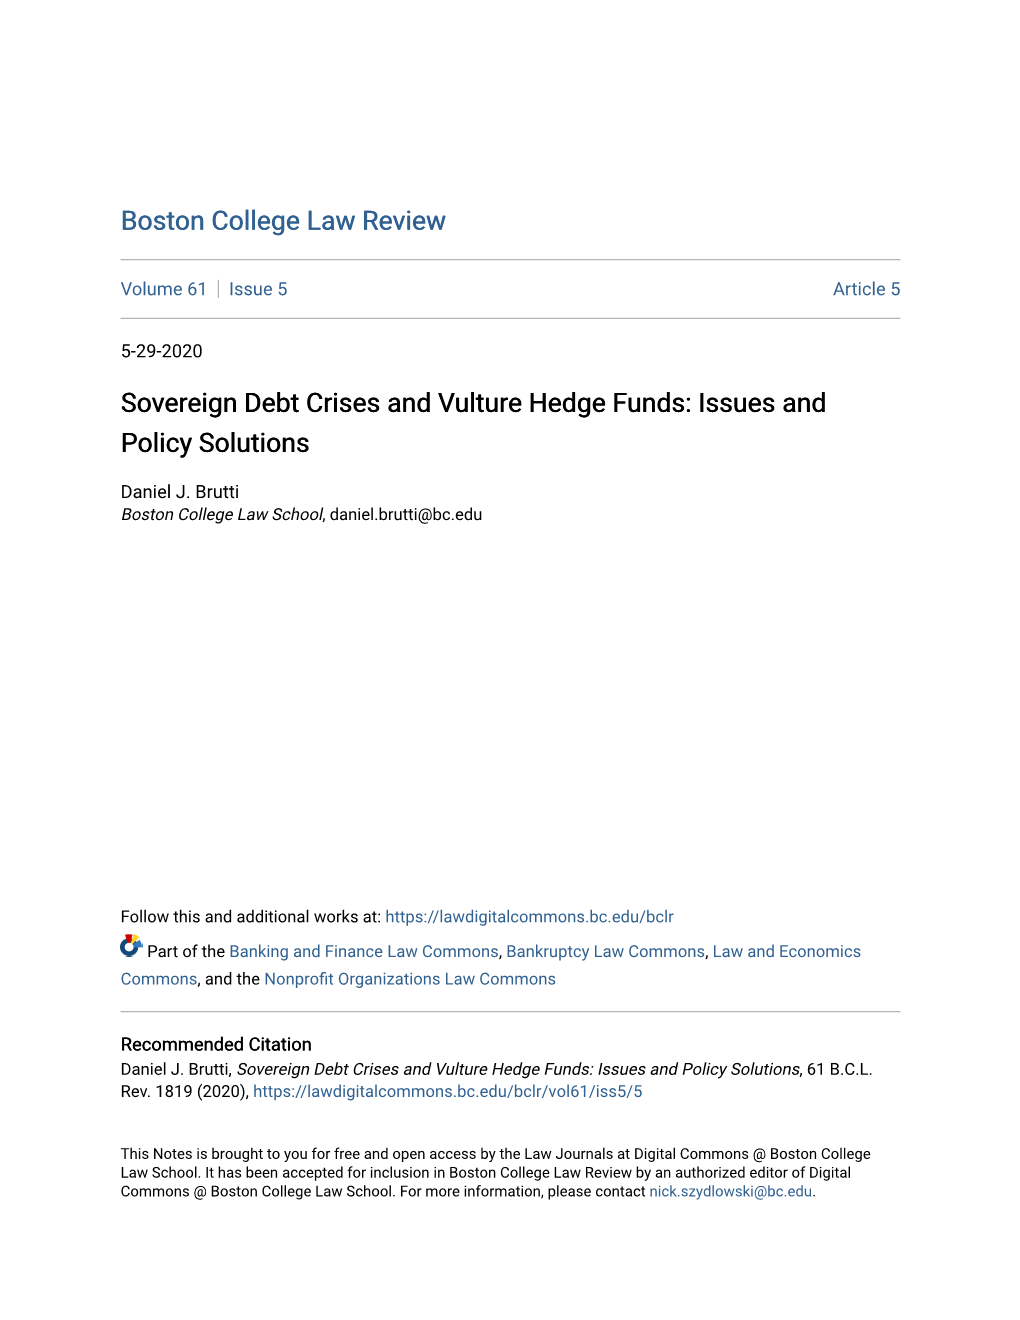 Sovereign Debt Crises and Vulture Hedge Funds: Issues and Policy Solutions